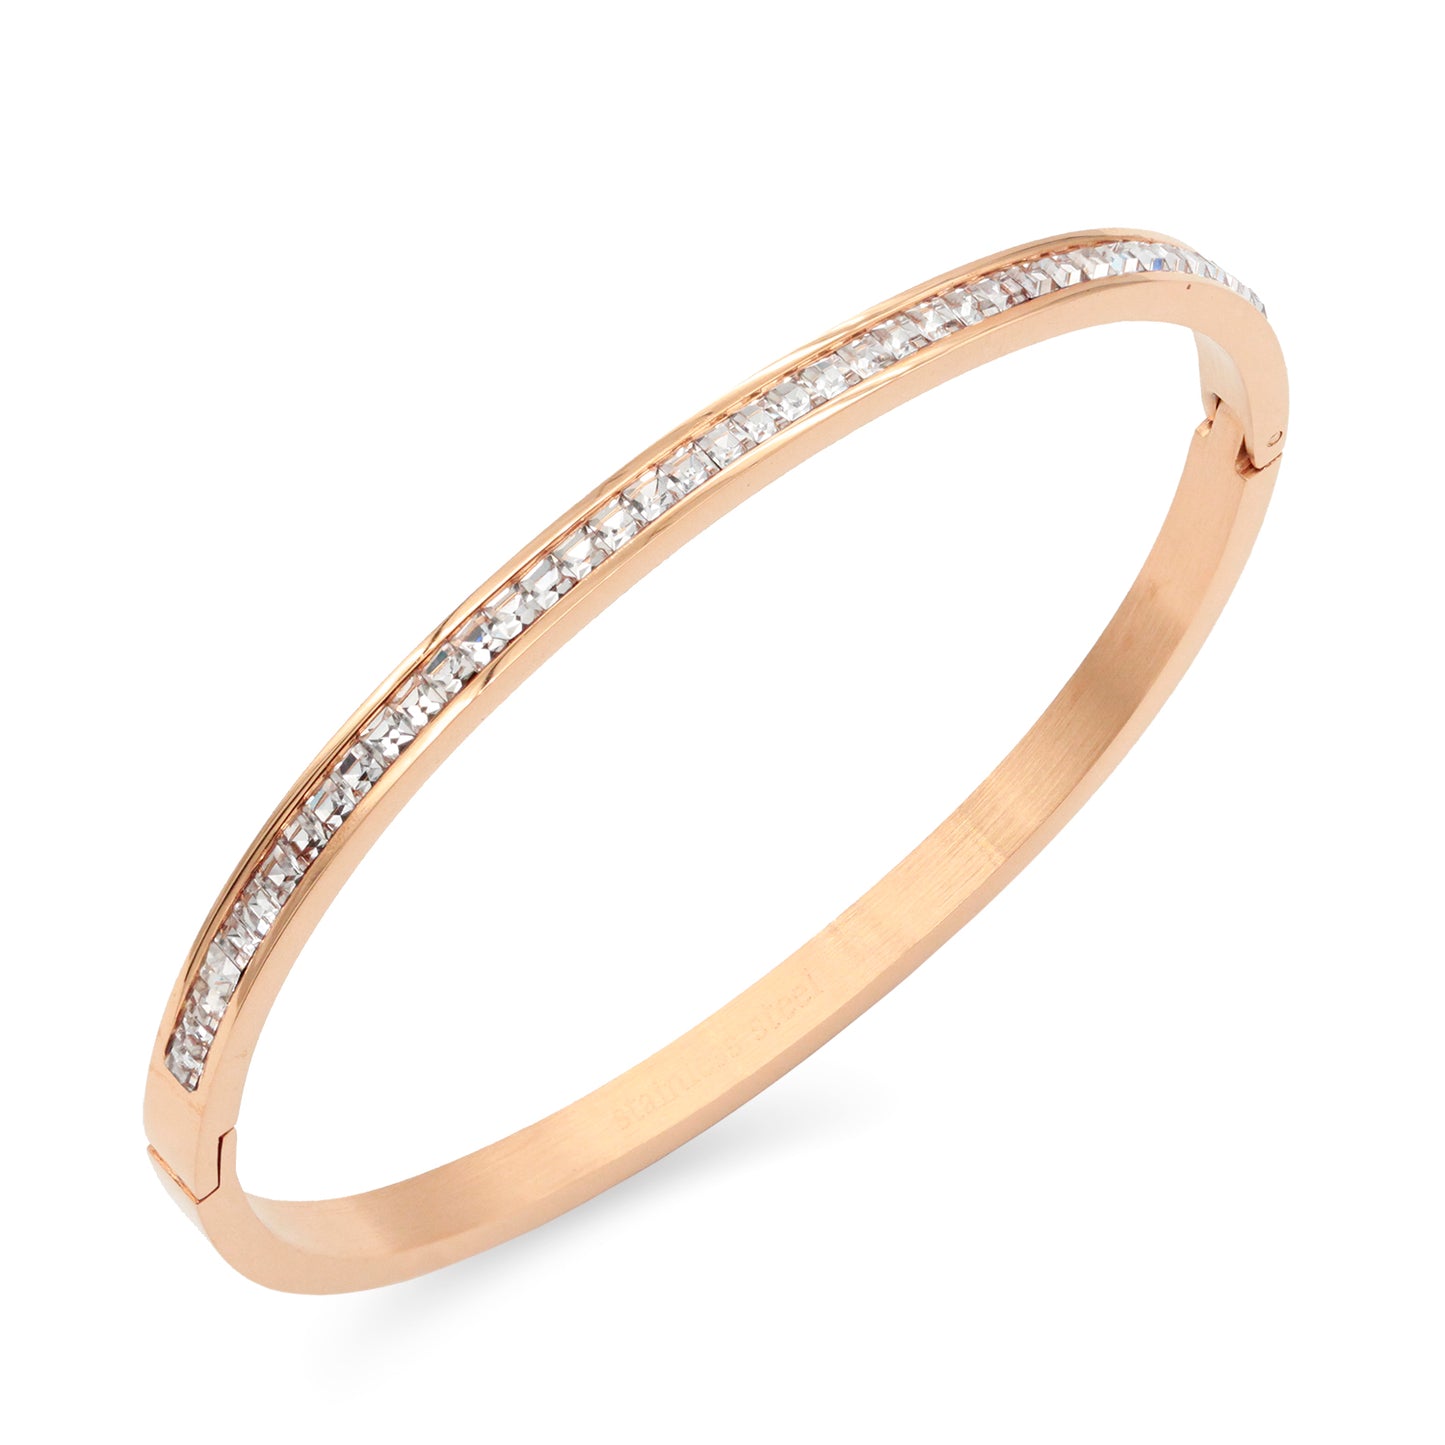 Rose Gold Plated Stainless Steel Hinged Bangle Bracelets Paved with Cubic Zirconia